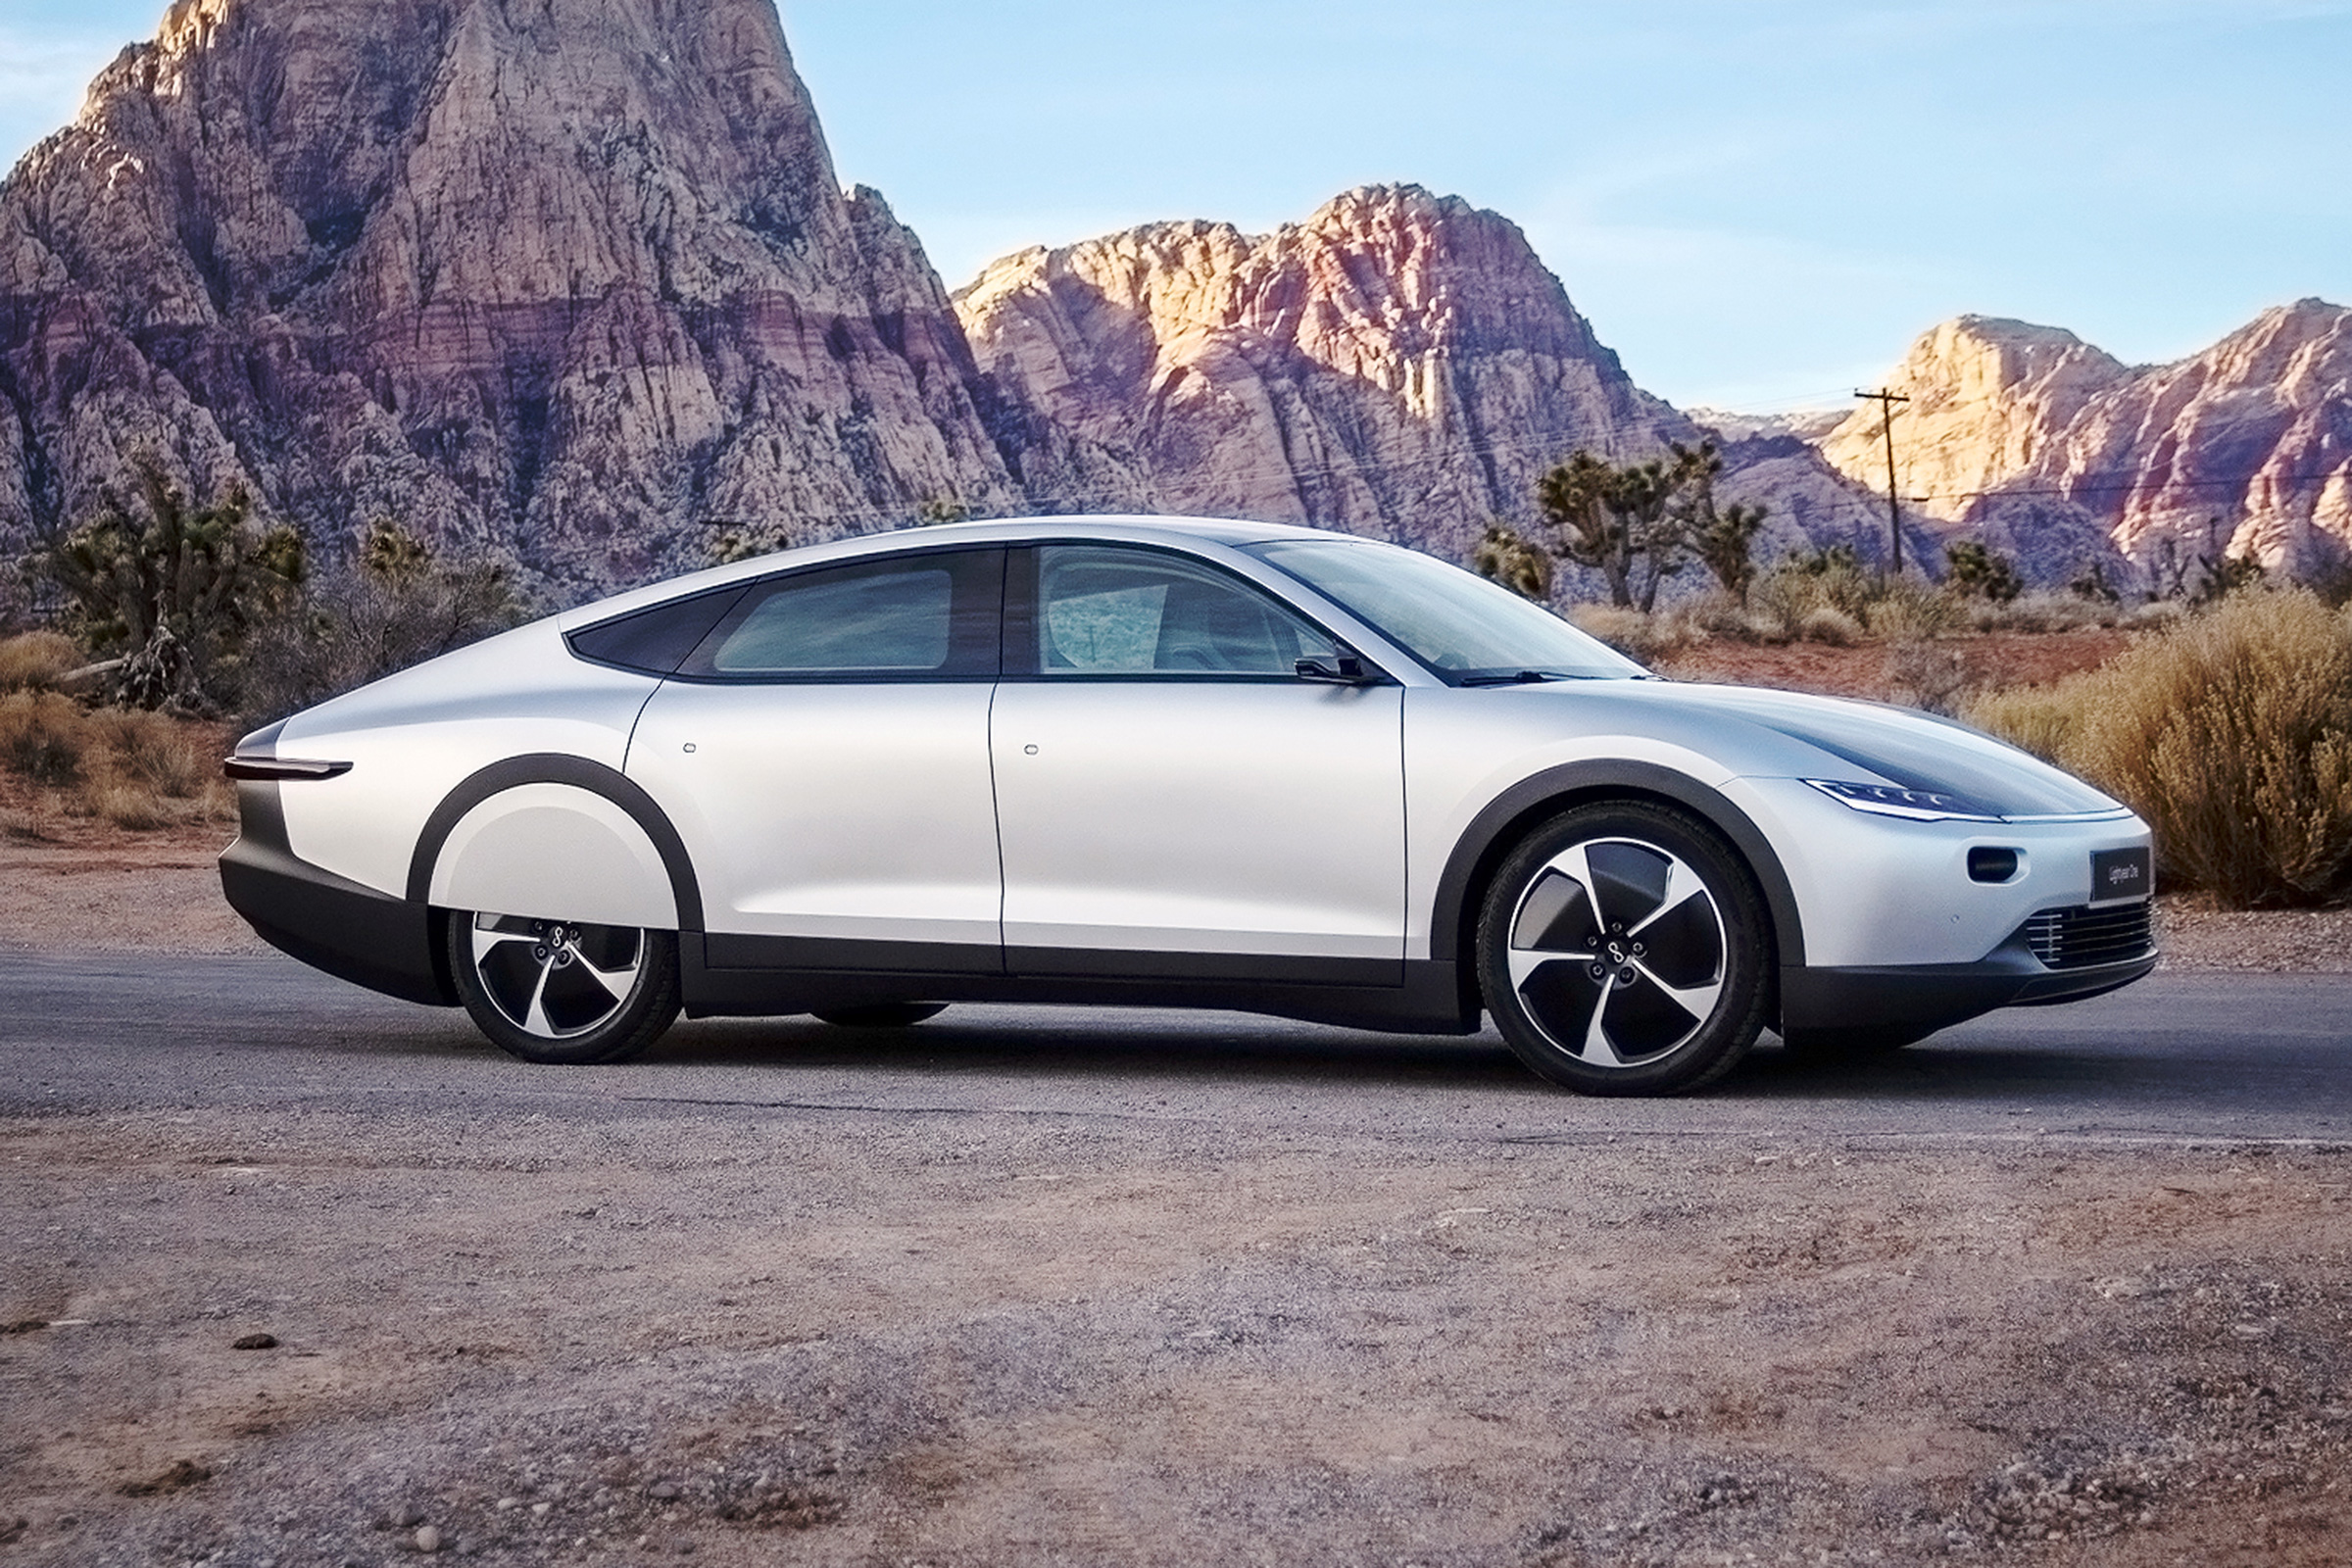 Lightyear One cheaper solarelectric car promised DrivingElectric